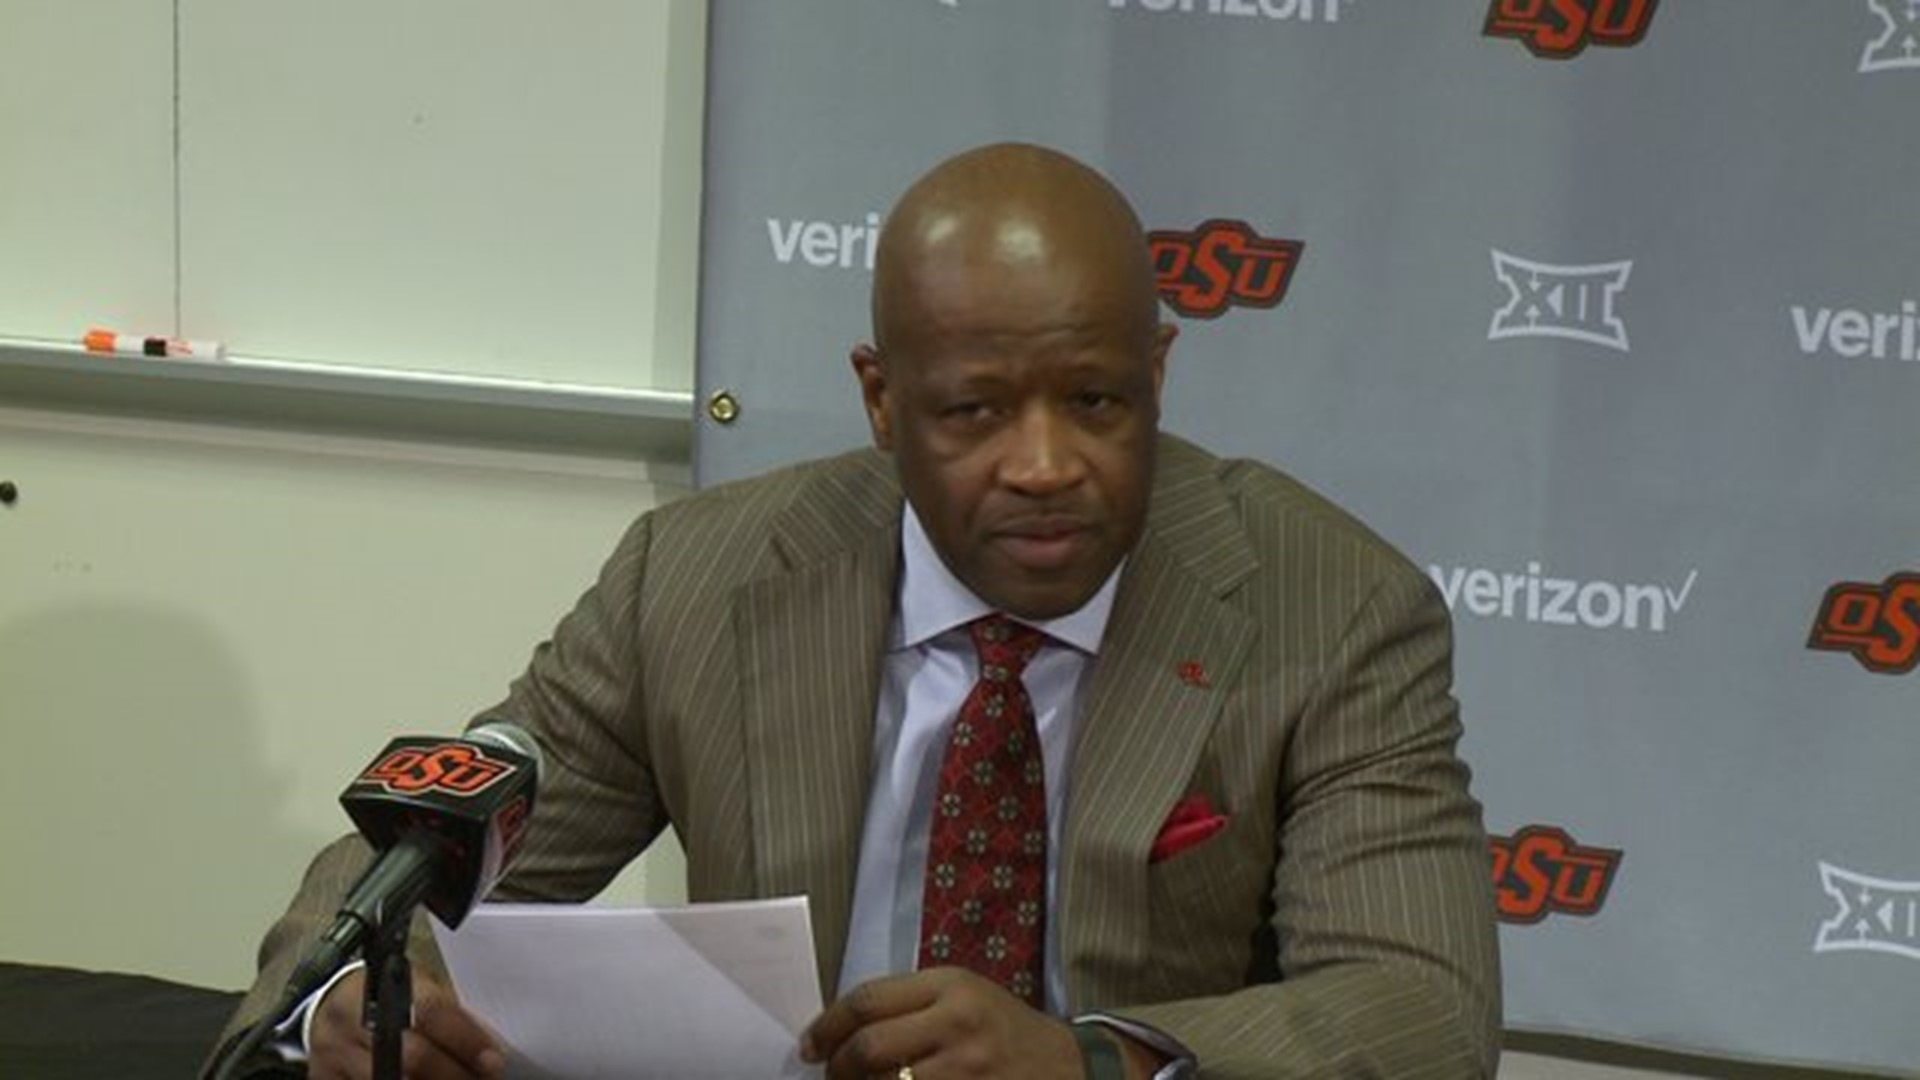 1-28 Mike Anderson POST OSU